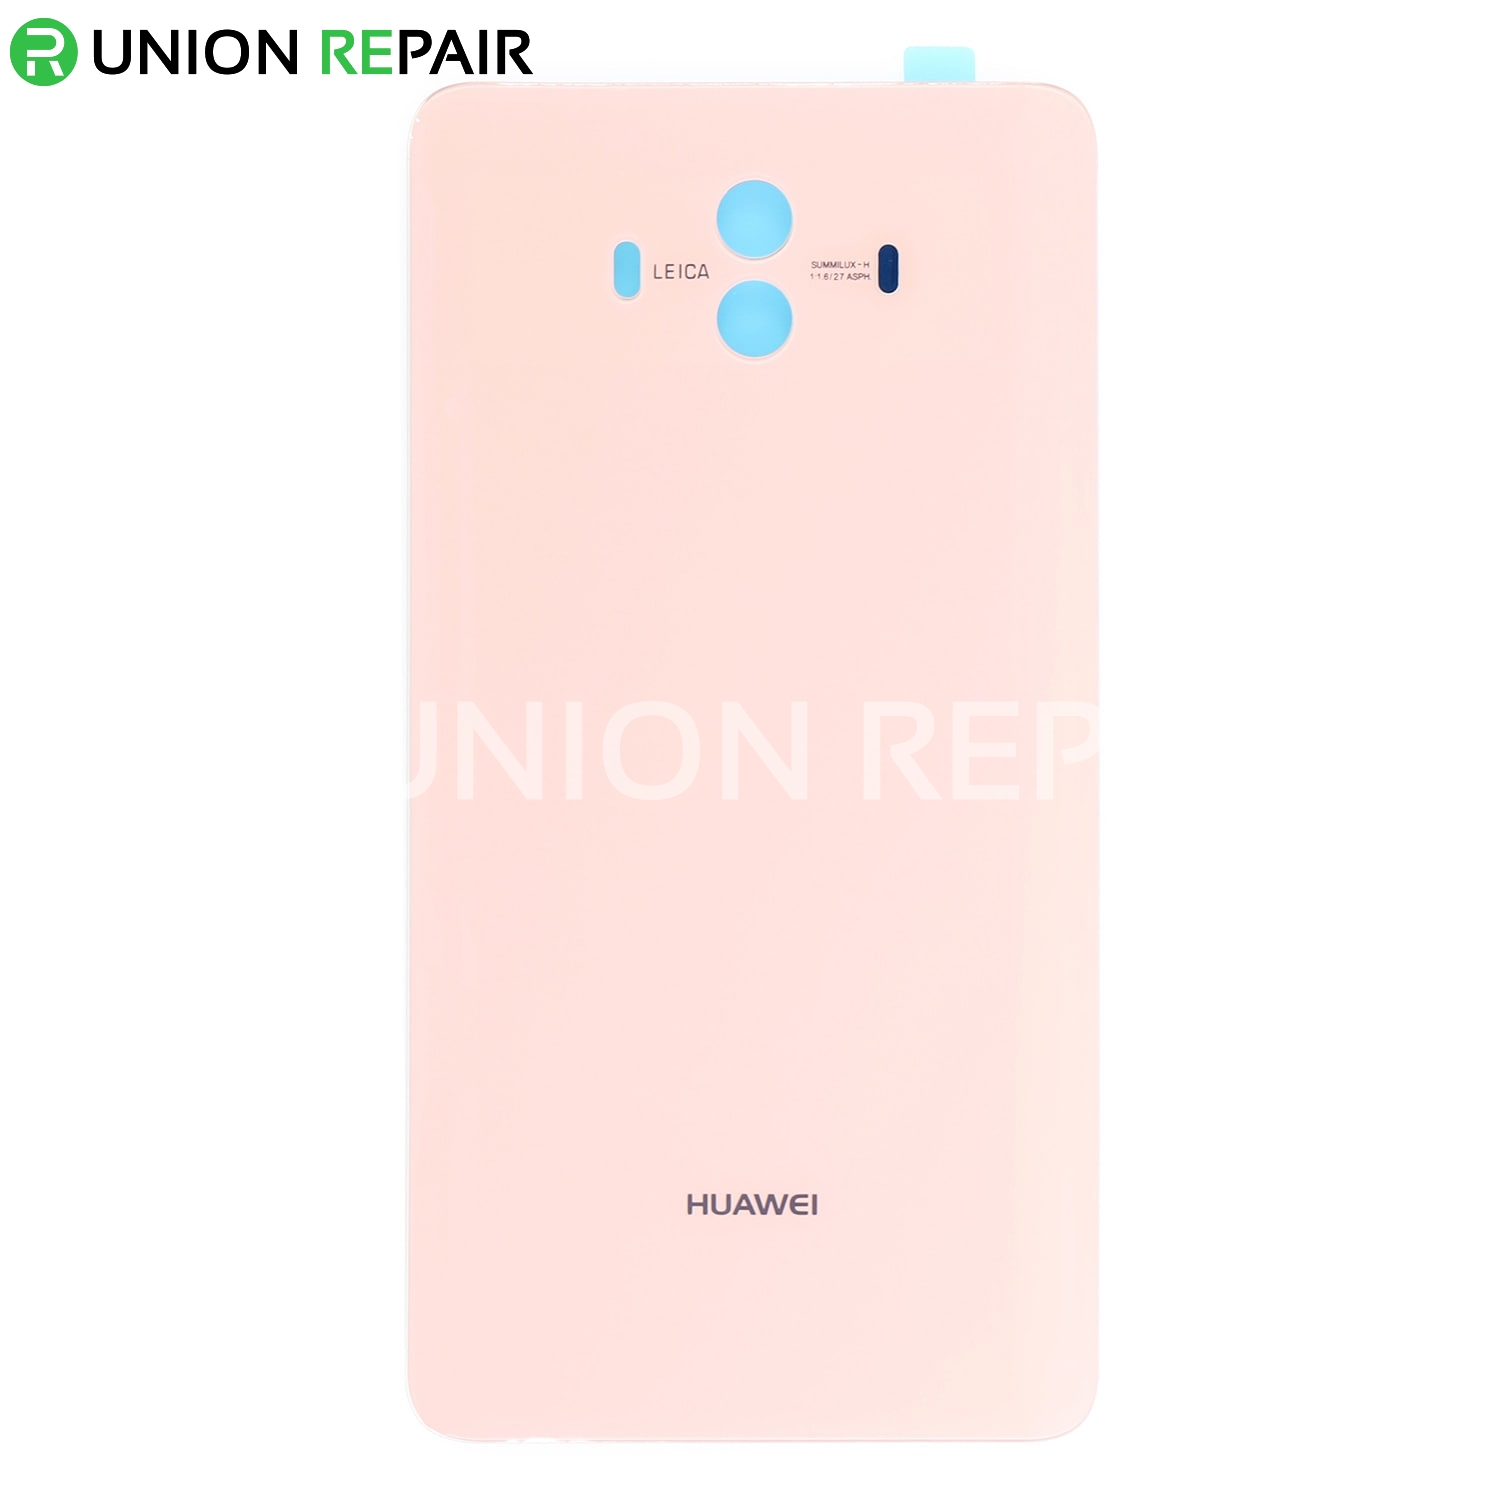 Replacement for Huawei Mate 10 Battery Door - Pink